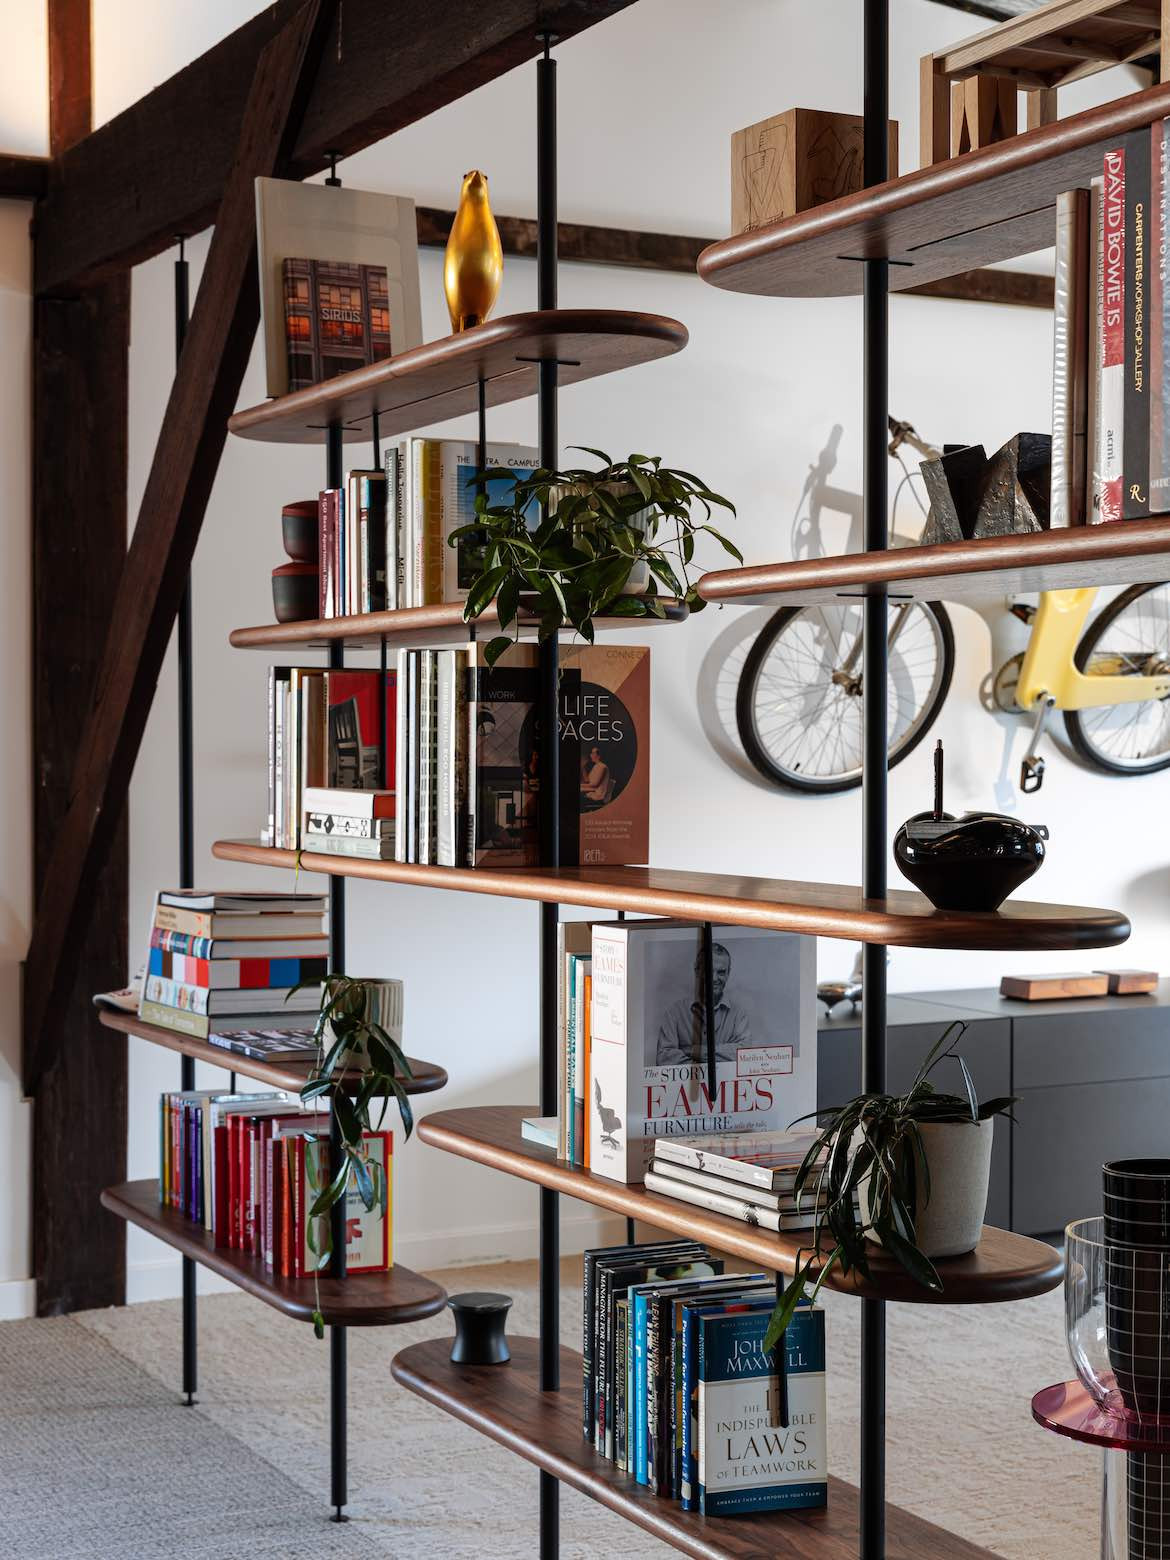 Elan Plus Morse brown timber Shelving with black beams, holding books and plans, in front of a yellow bike hanging on a wall above a couch.